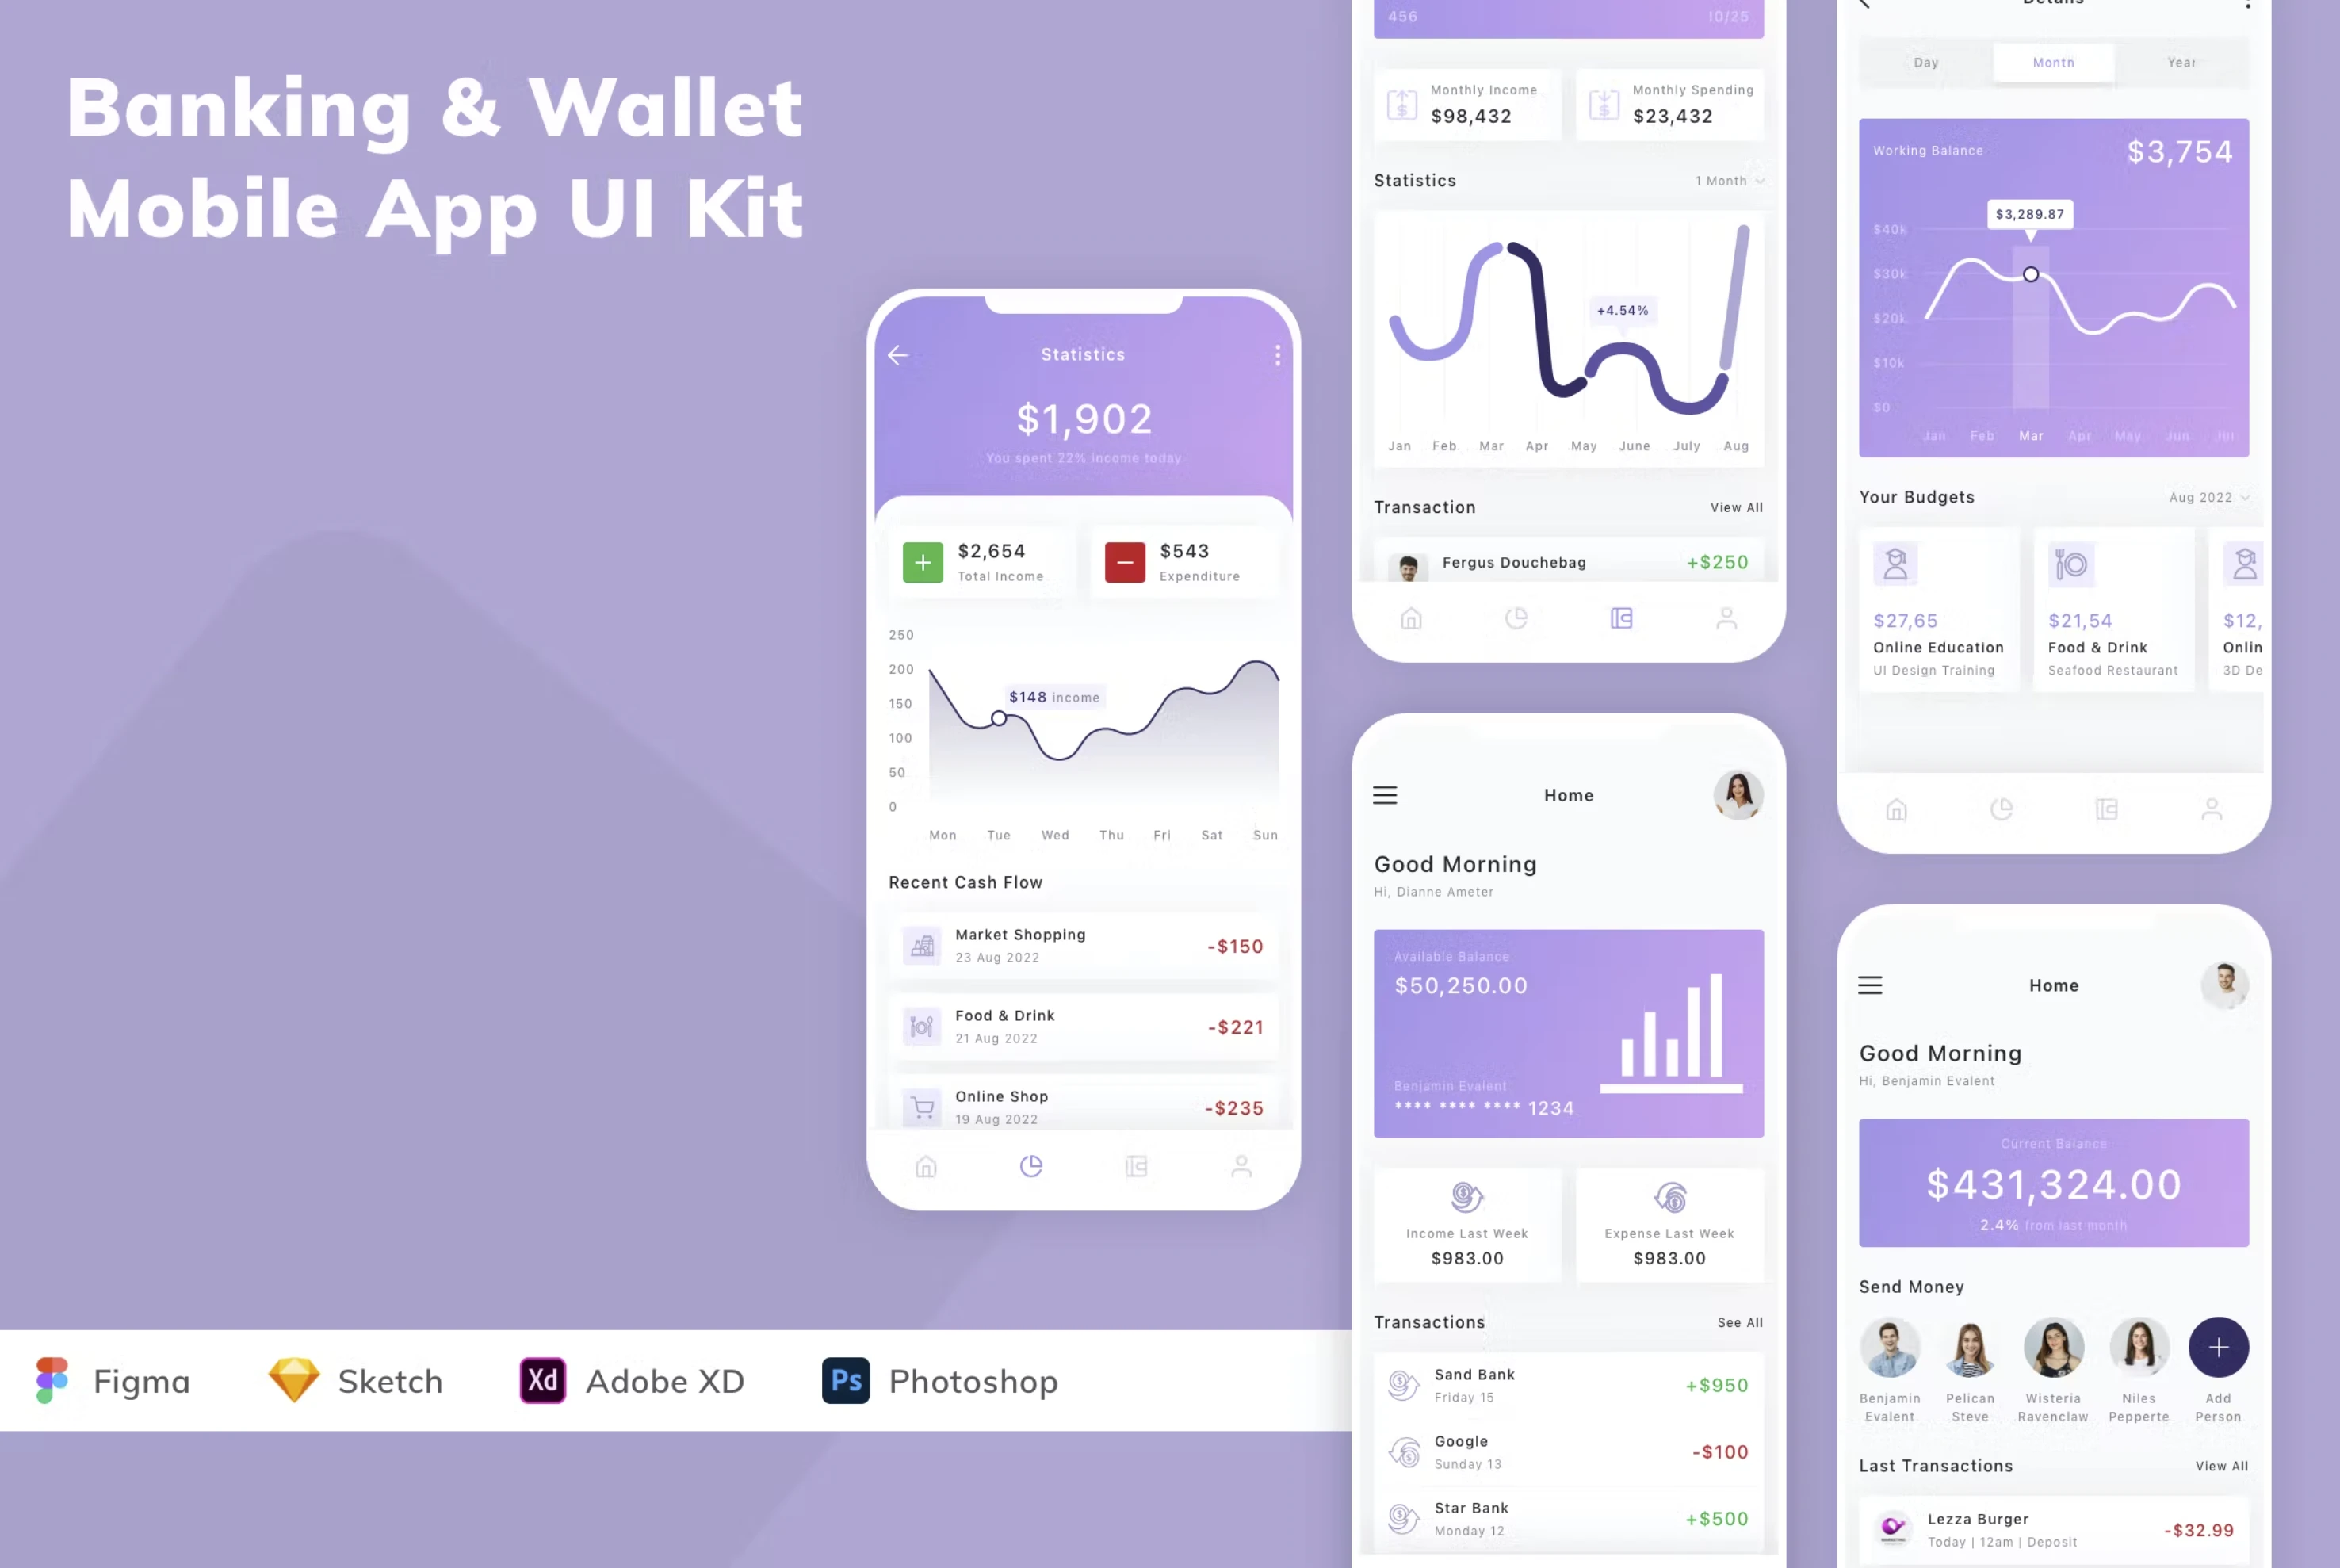 Figma UI kit - Banking & Wallet Mobile App (Community) for Figma and Adobe XD